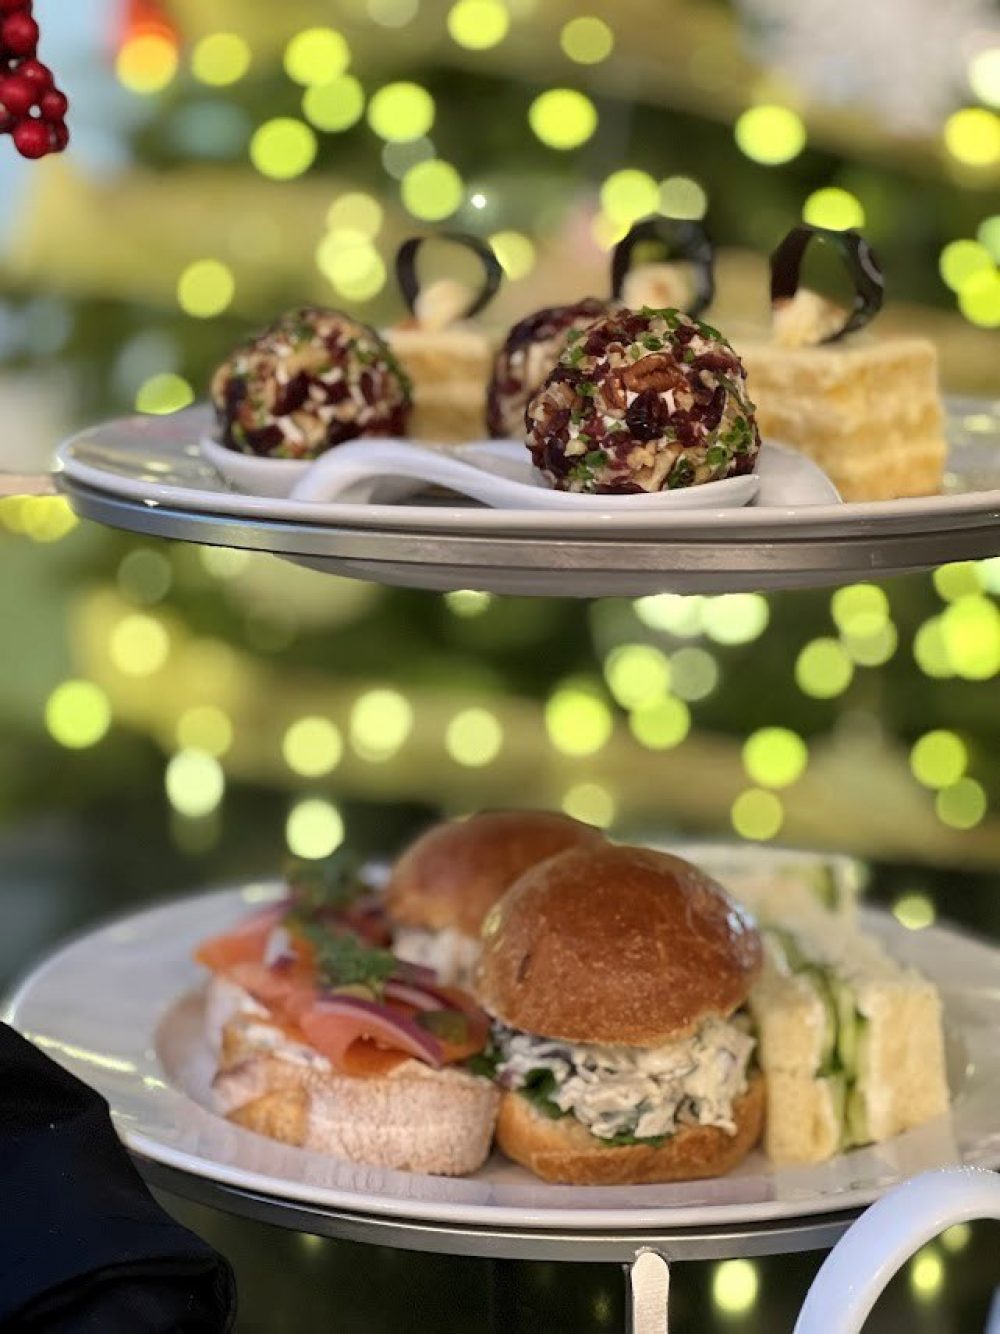 Savory finger sandwiches (above) and canapes (below) are a wonderfully satisfying part of Verzênay Chicago's Holiday Tea Service. Photo credit Verzênay